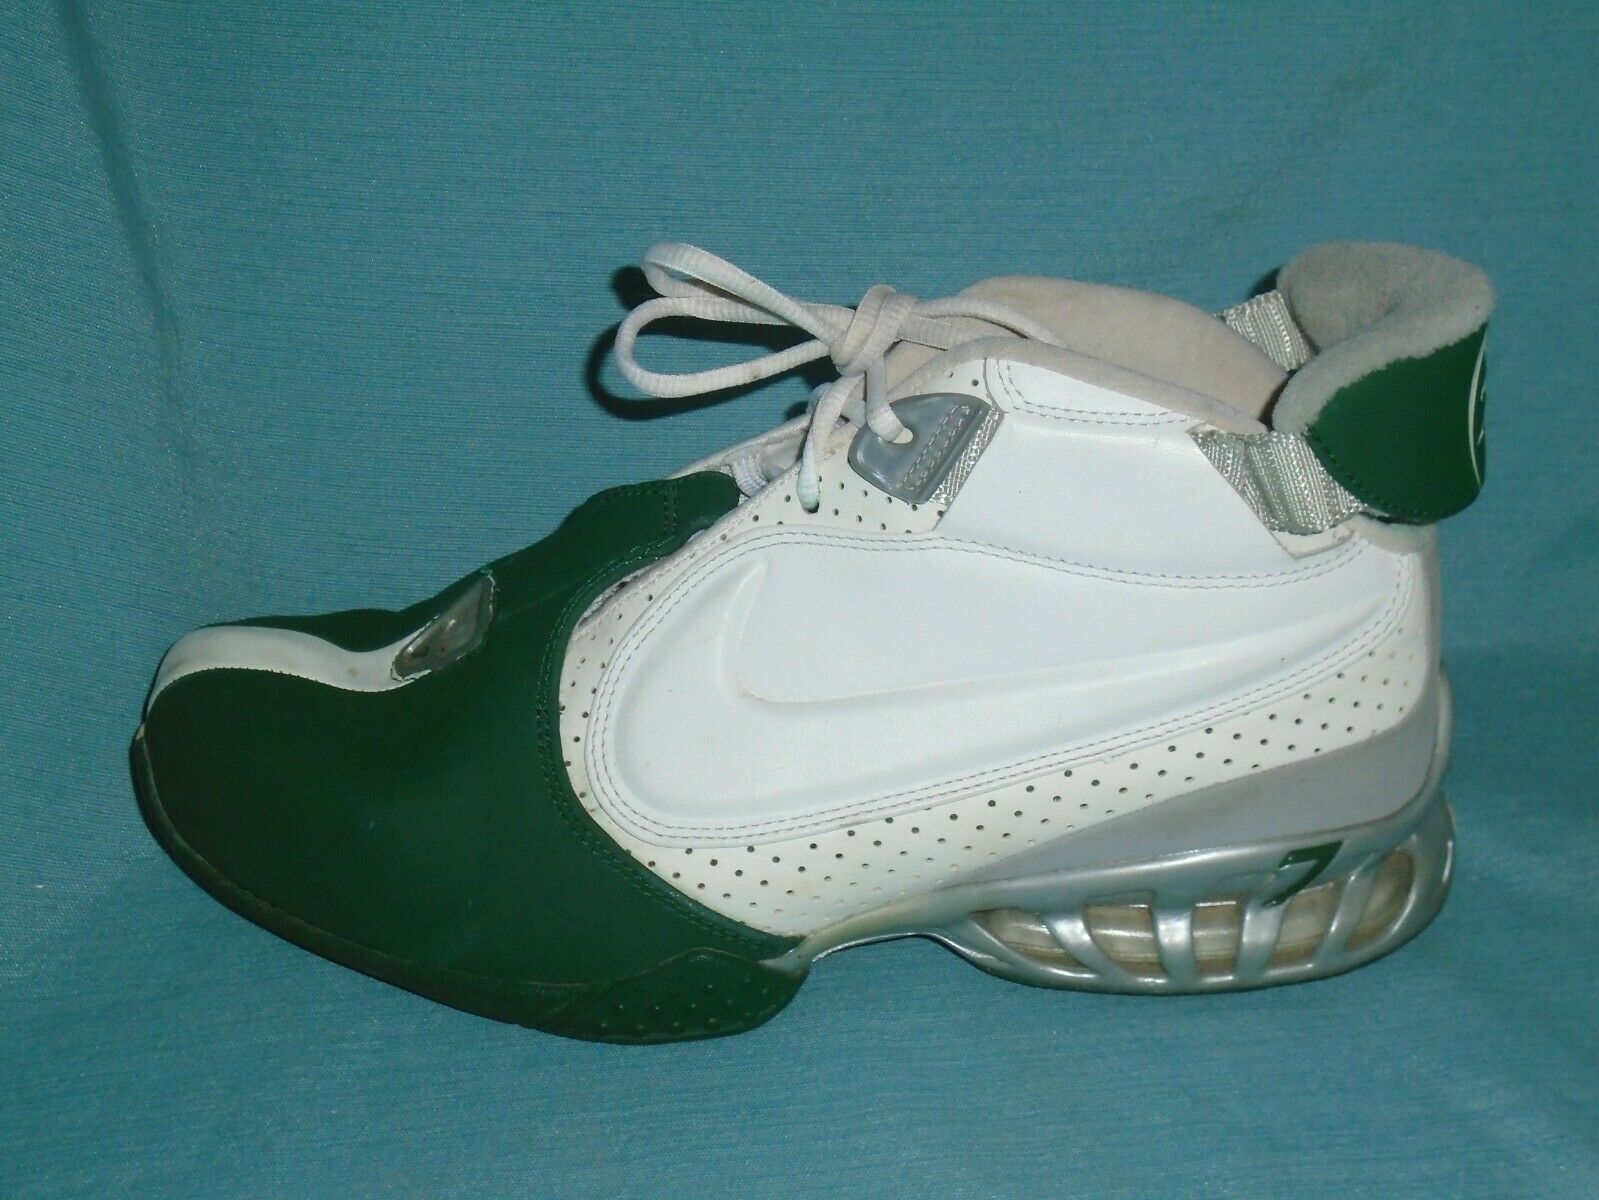 Nike Air Zoom Vick II Eagles Lace Up Athletic Shoes 599446-100 Size 11 WELL USED